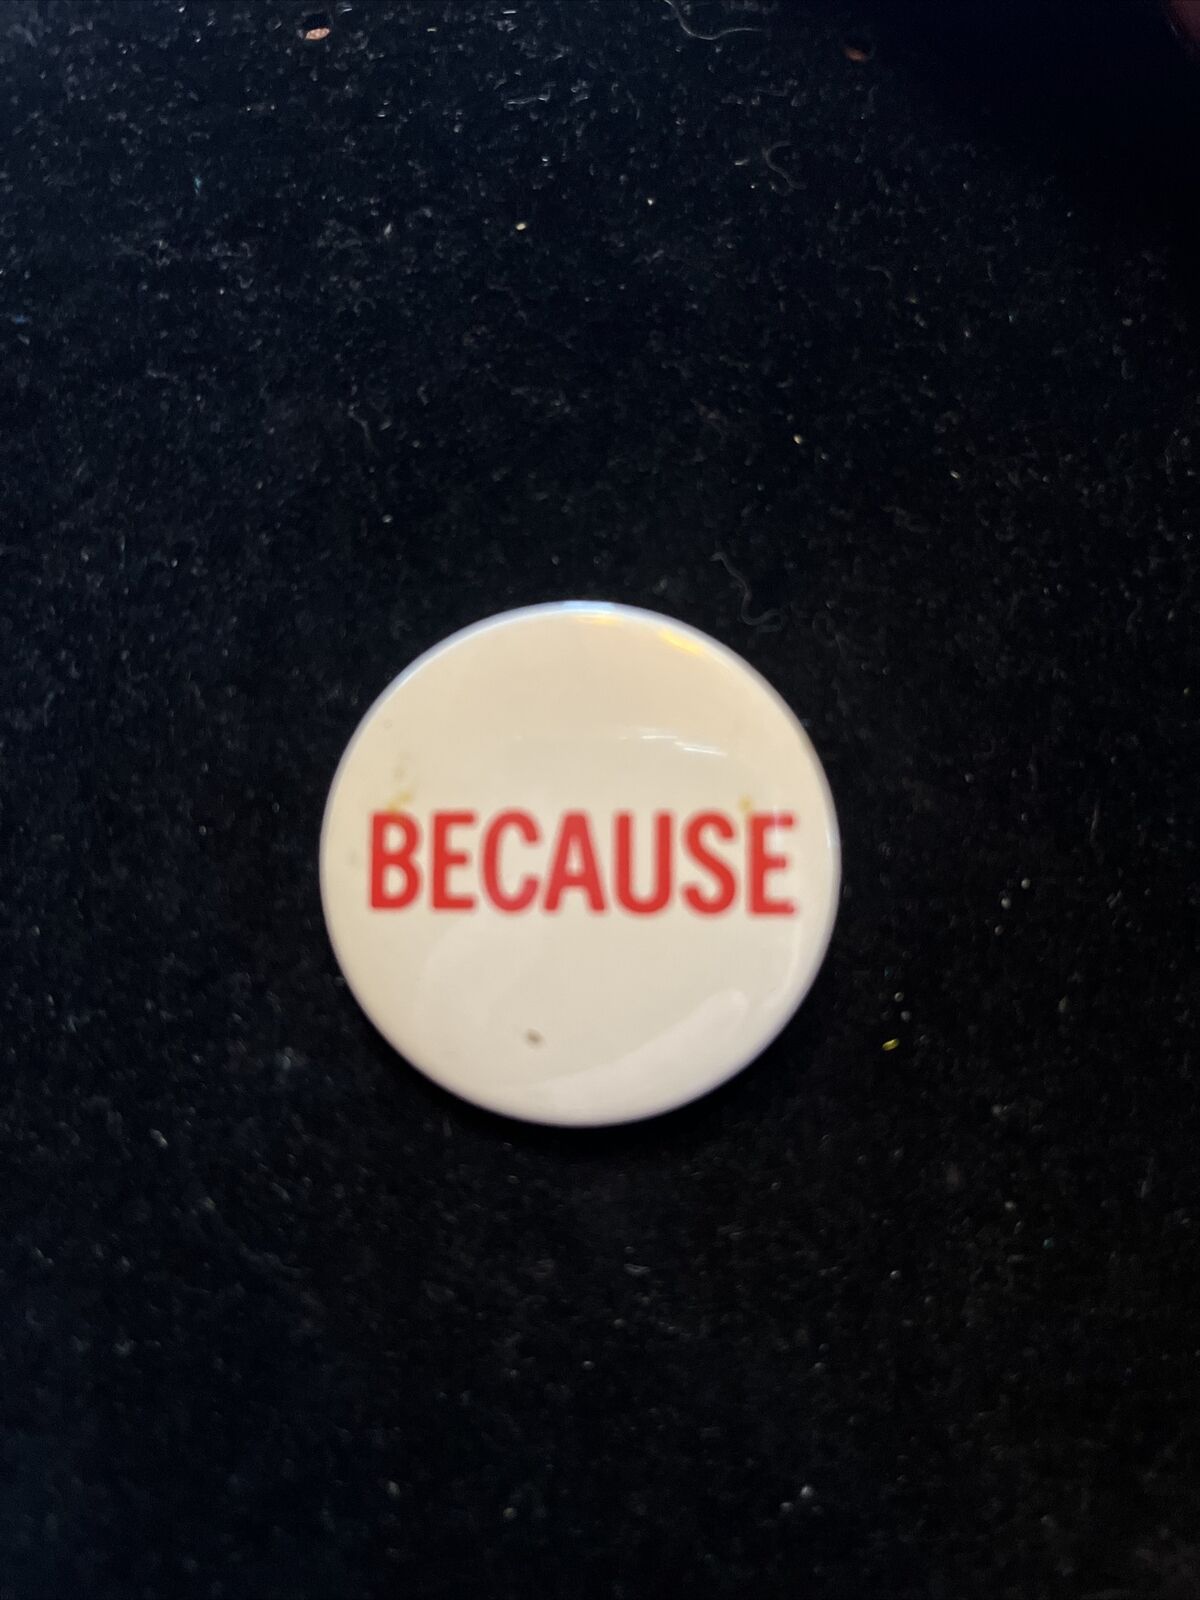 VTG “BECAUSE” White & Red Button Pinback 24C